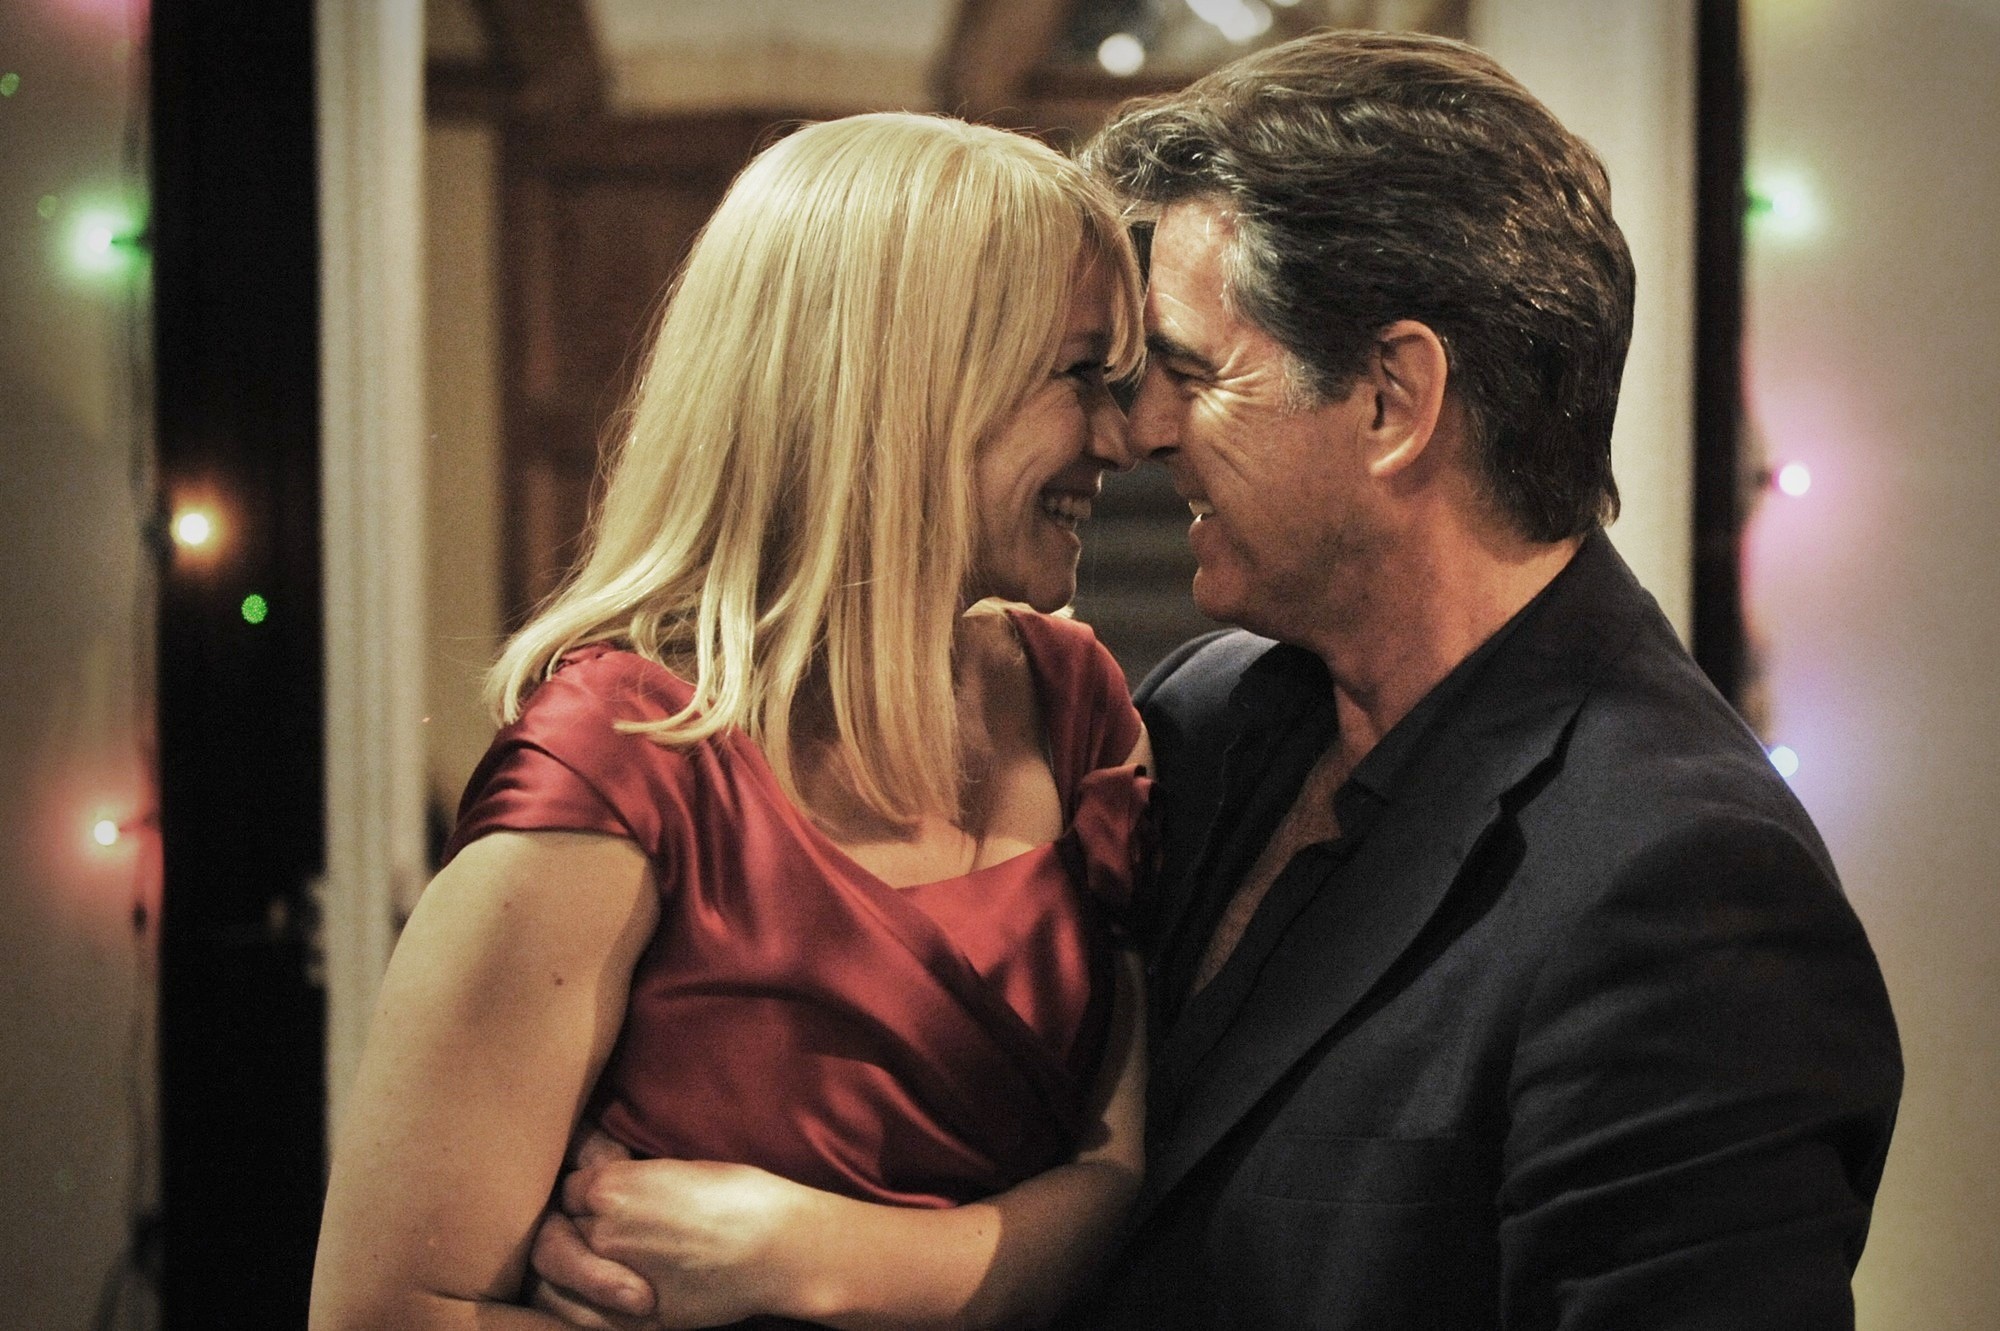 Trine Dyrholm stars as Ida and Pierce Brosnan stars as Philip in Sony Pictures Classics' Love Is All You Need (2013)